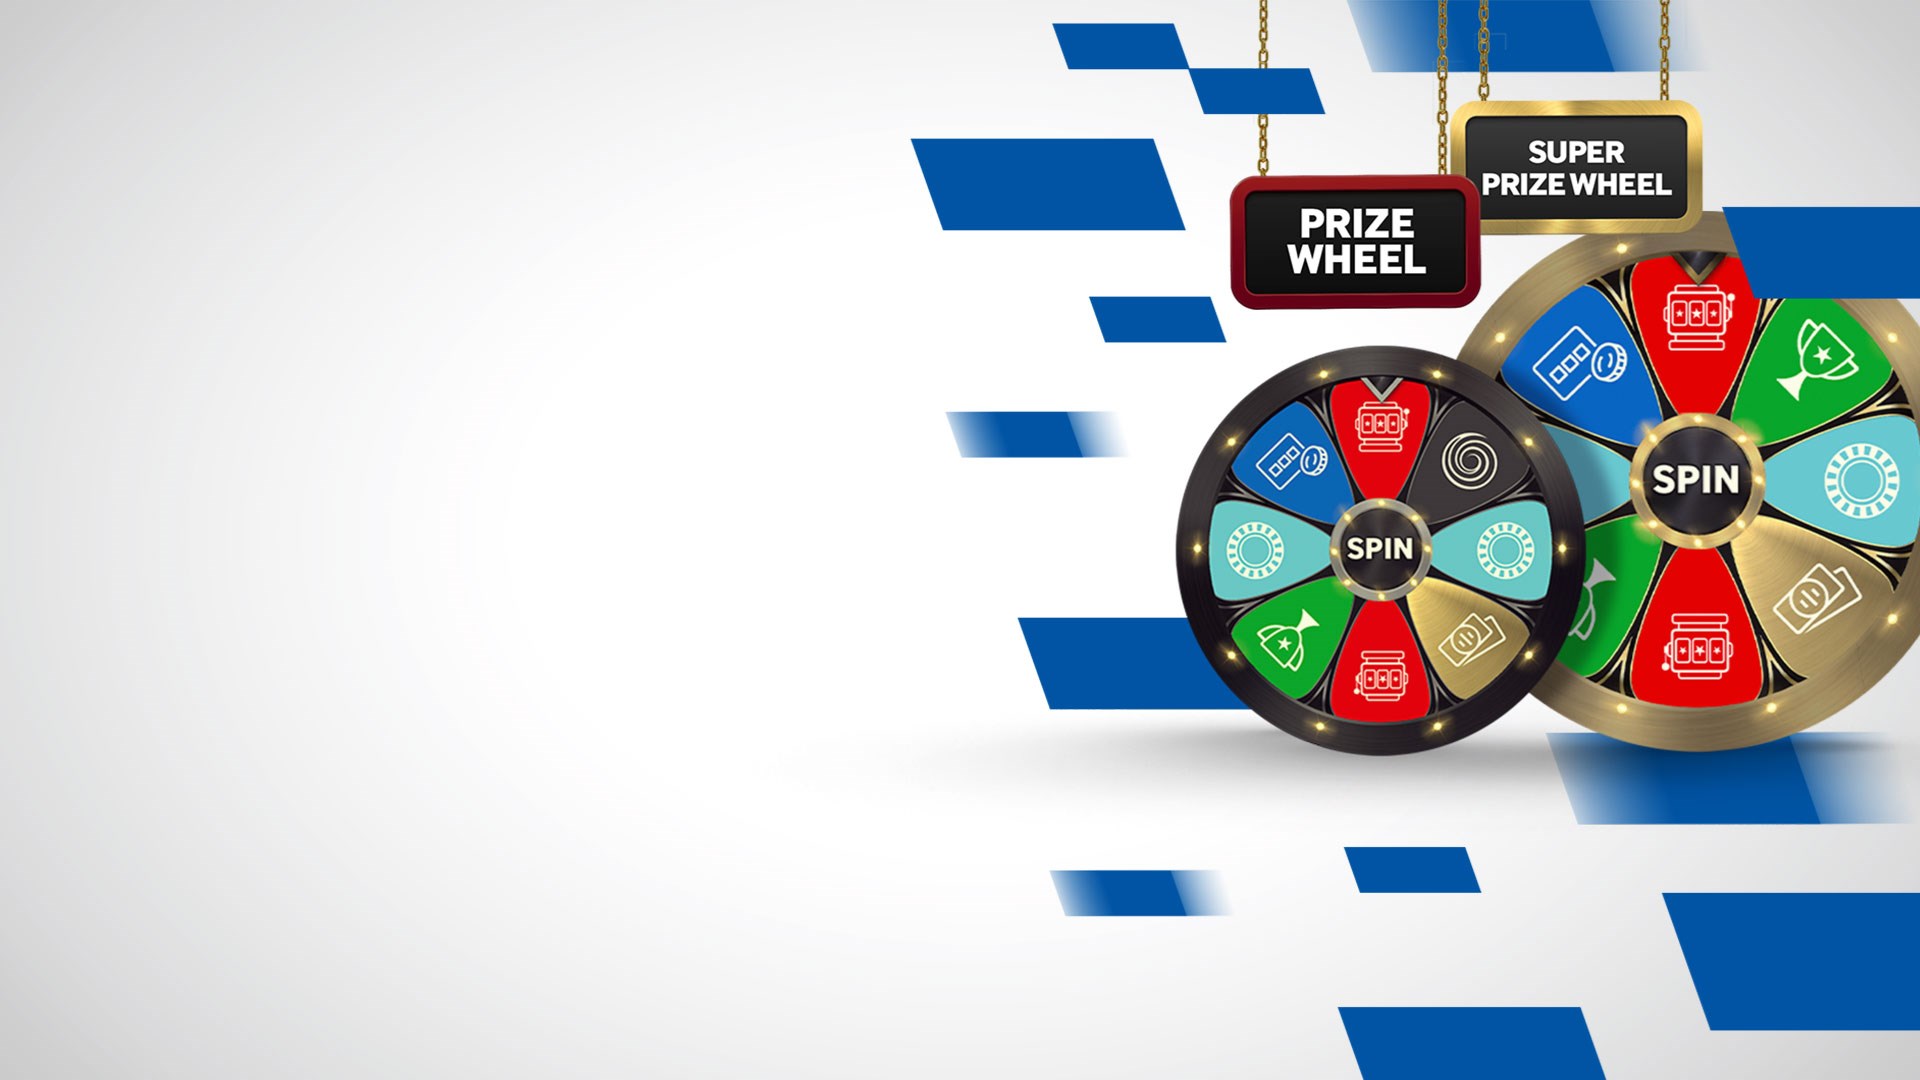 Free Spin on our Prize Wheel each day**